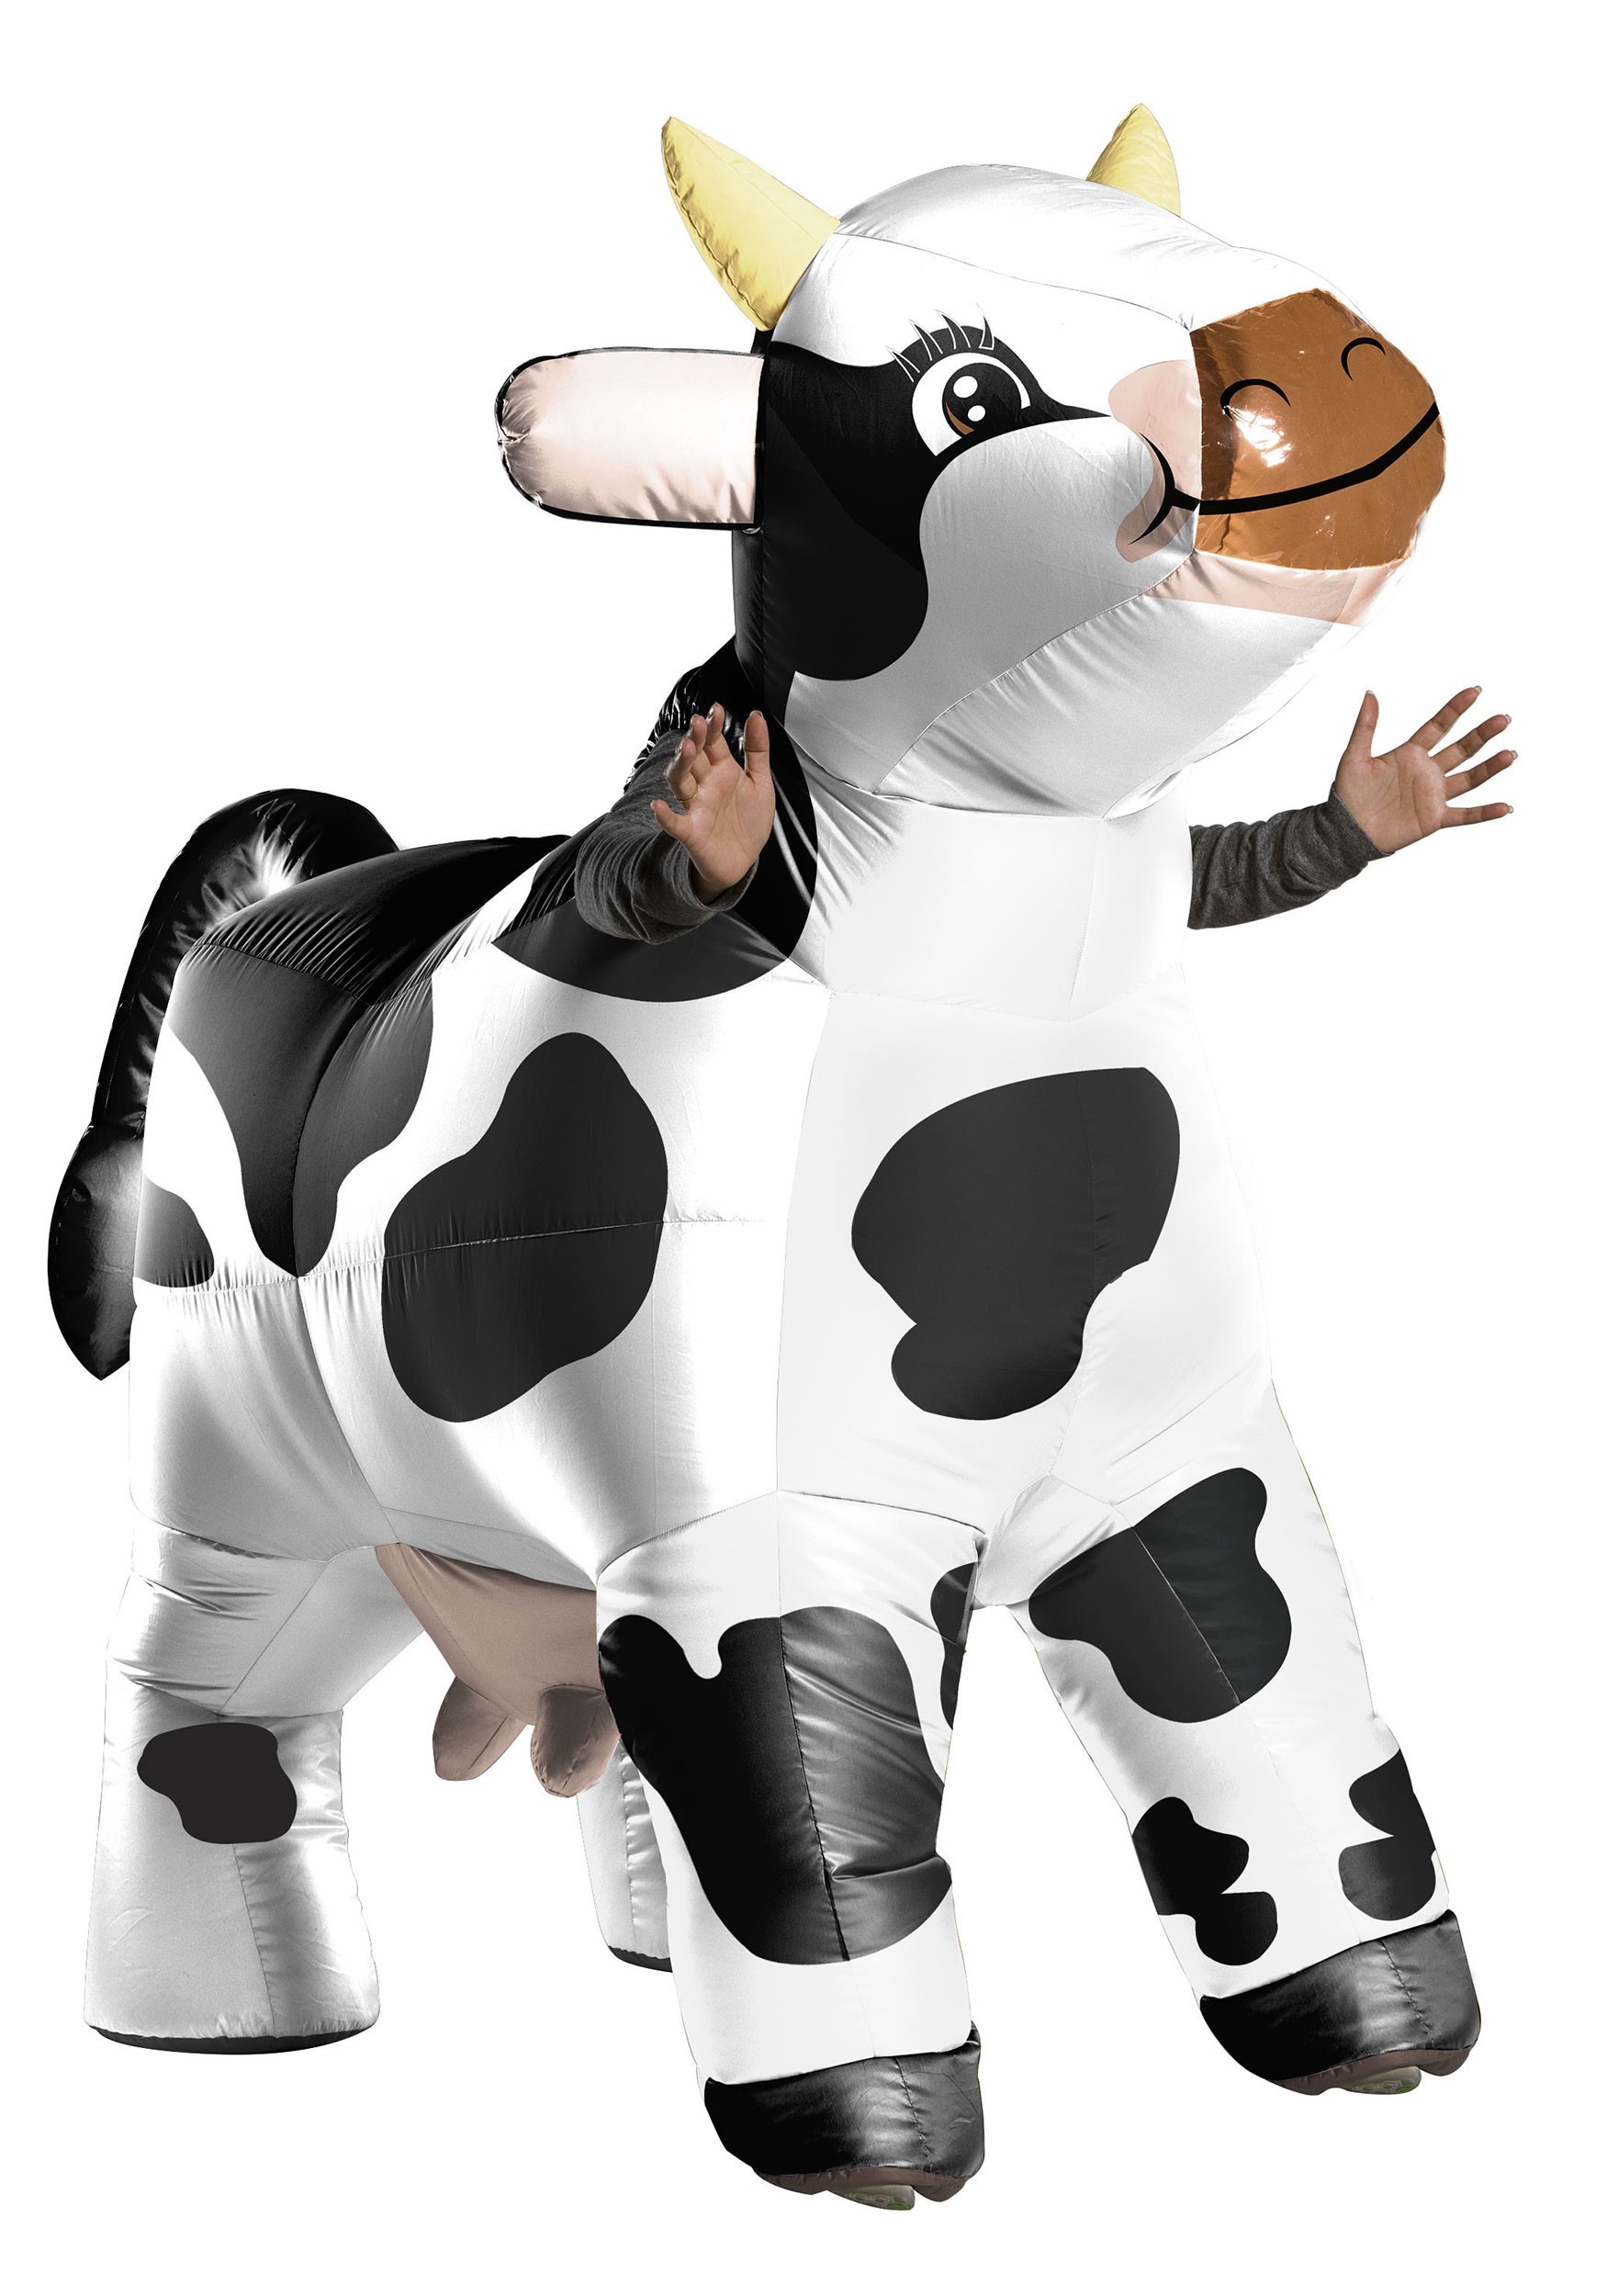 Inflatable Cow Adult Costume